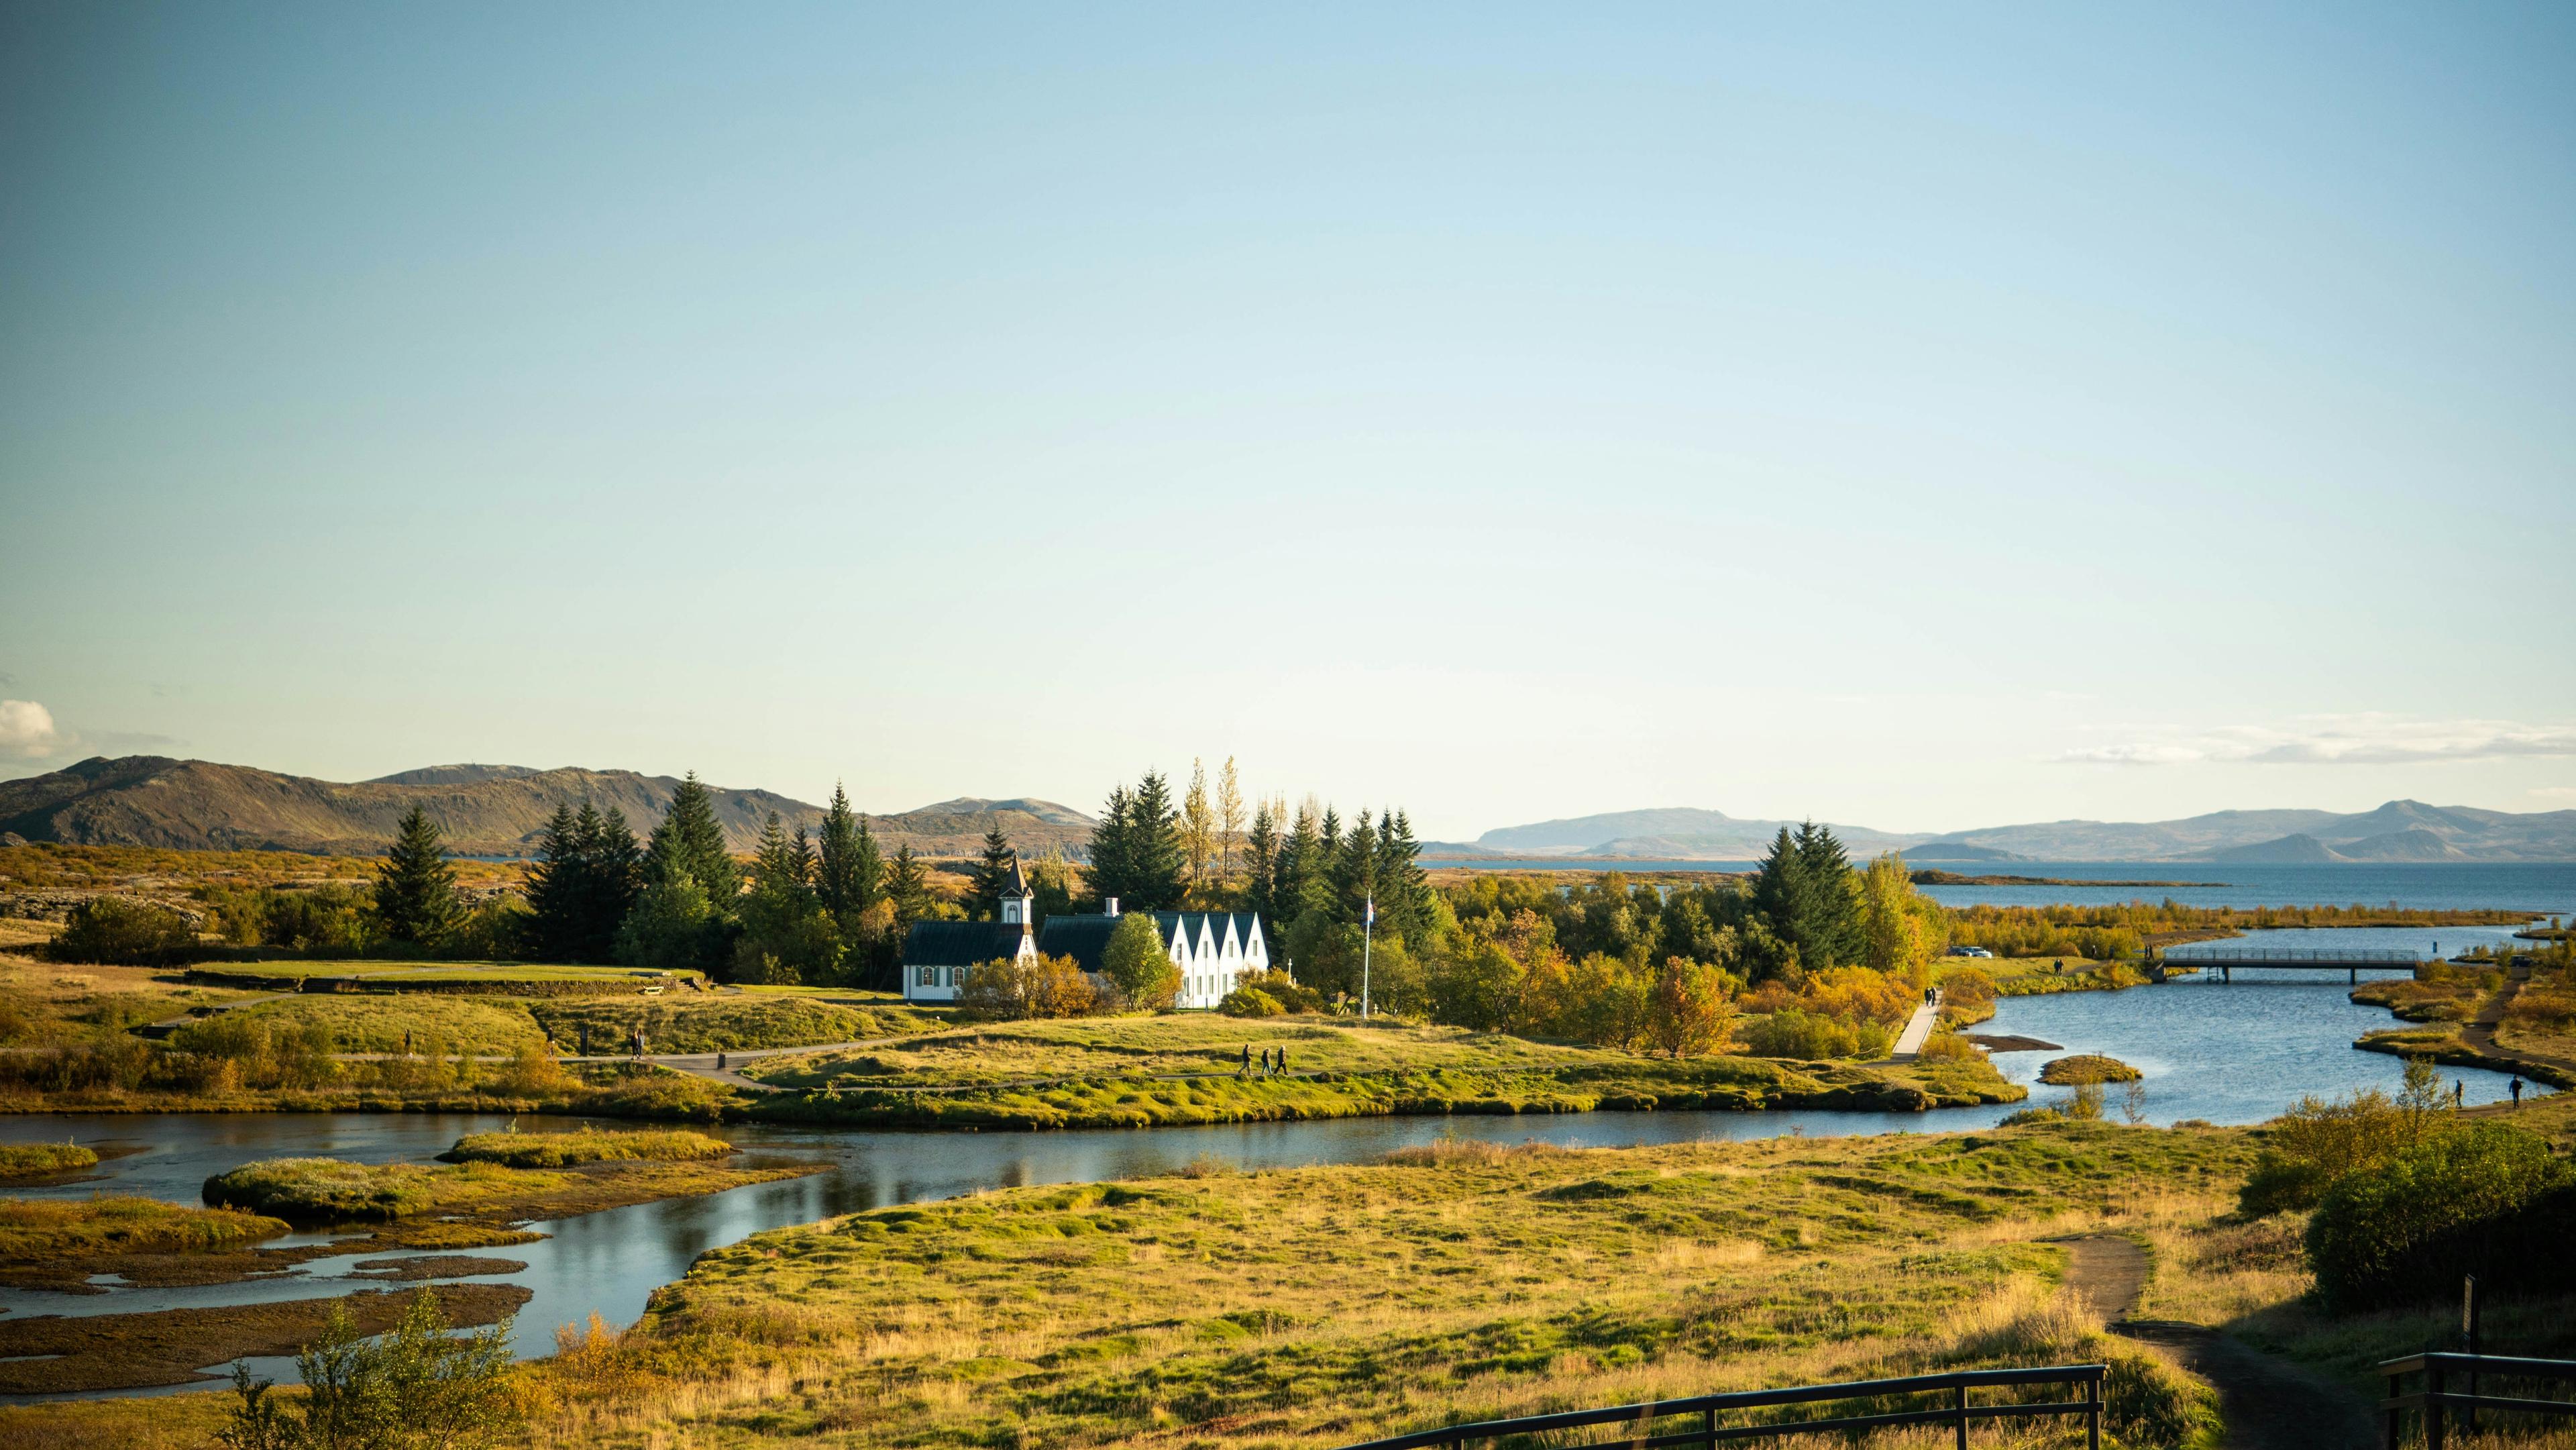 A serene landscape bathed in warm sunlight, featuring a small settlement with traditional buildings near a river, nestled within the vast, open plains and gentle hills, reminiscent of Þingvellir (Thingvellir) National Park in Iceland.